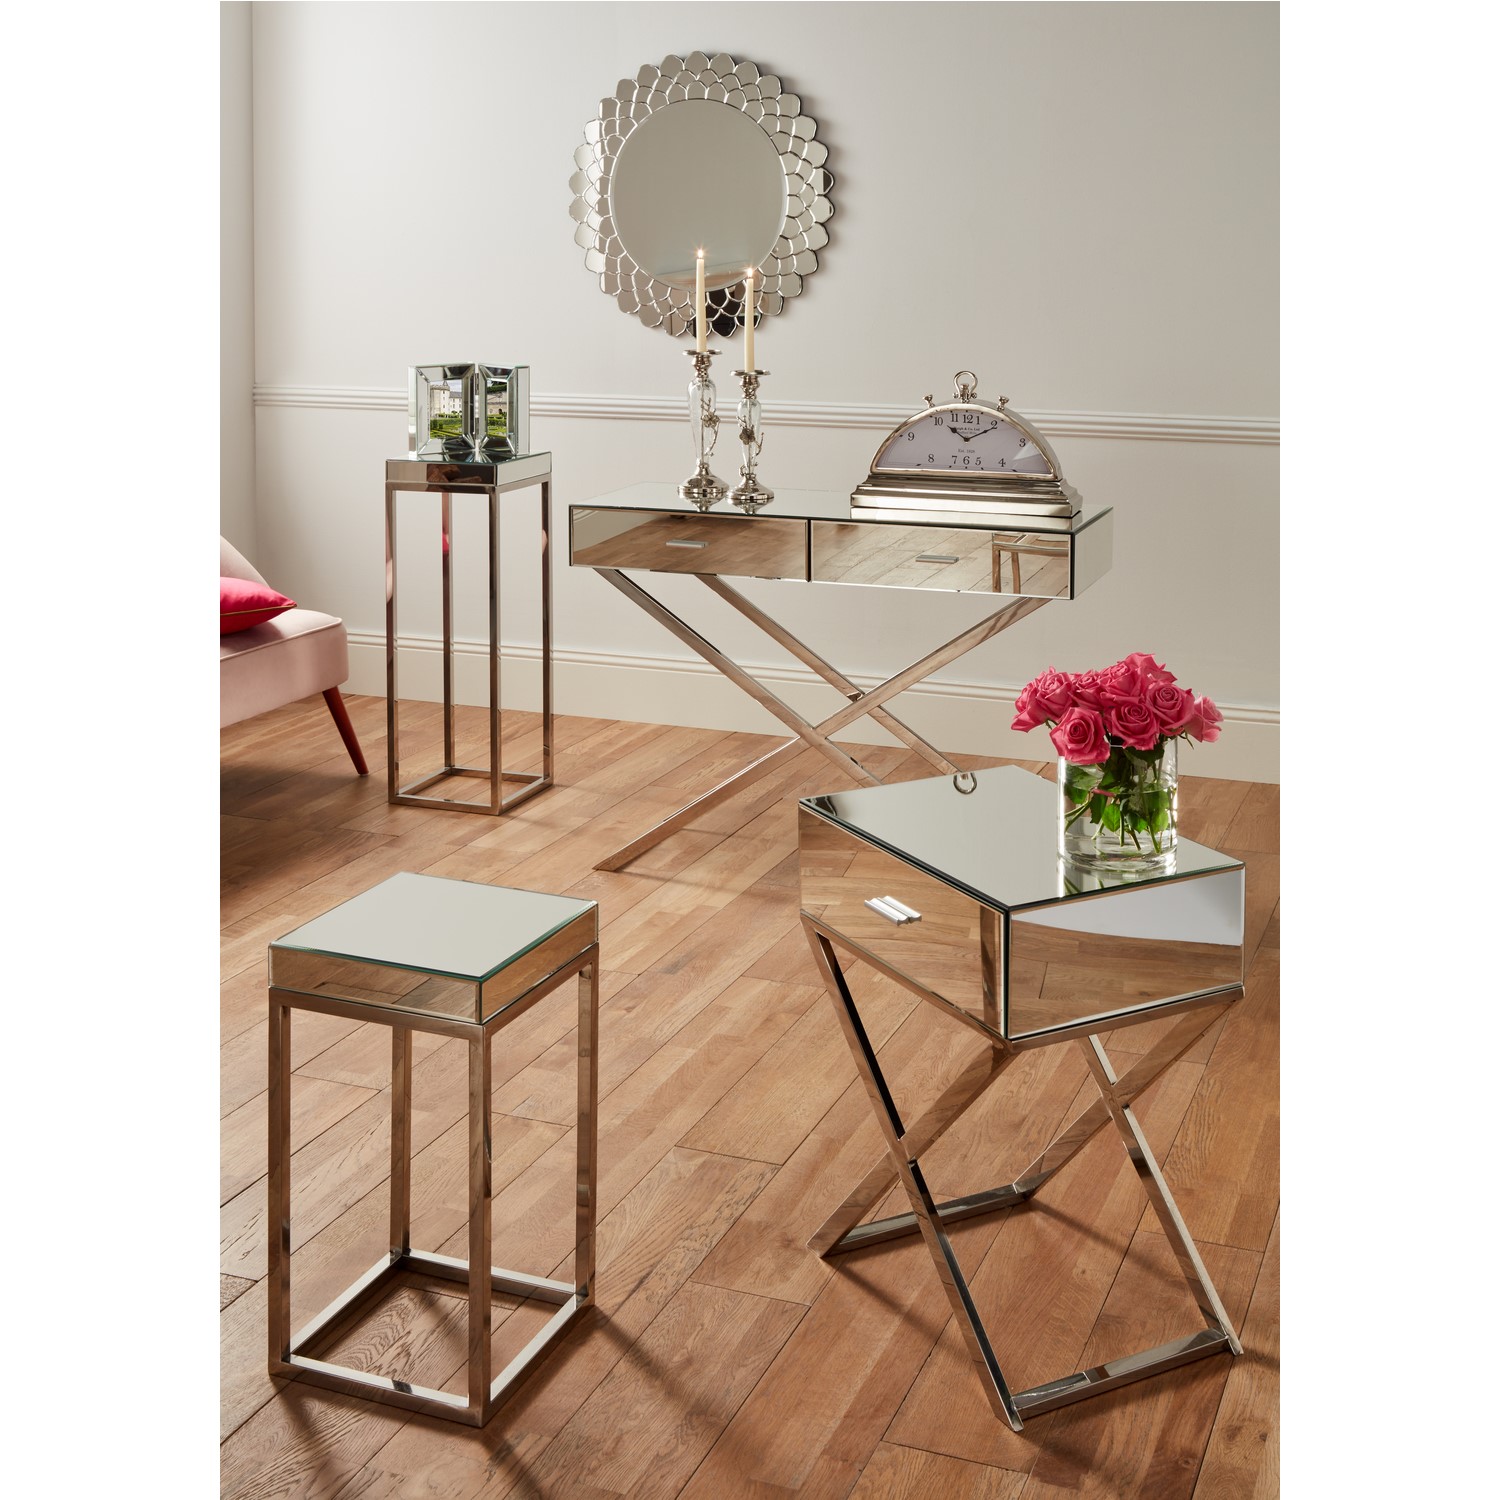 Mirrored Small Side Table In Glass, Mirrored Small End Table